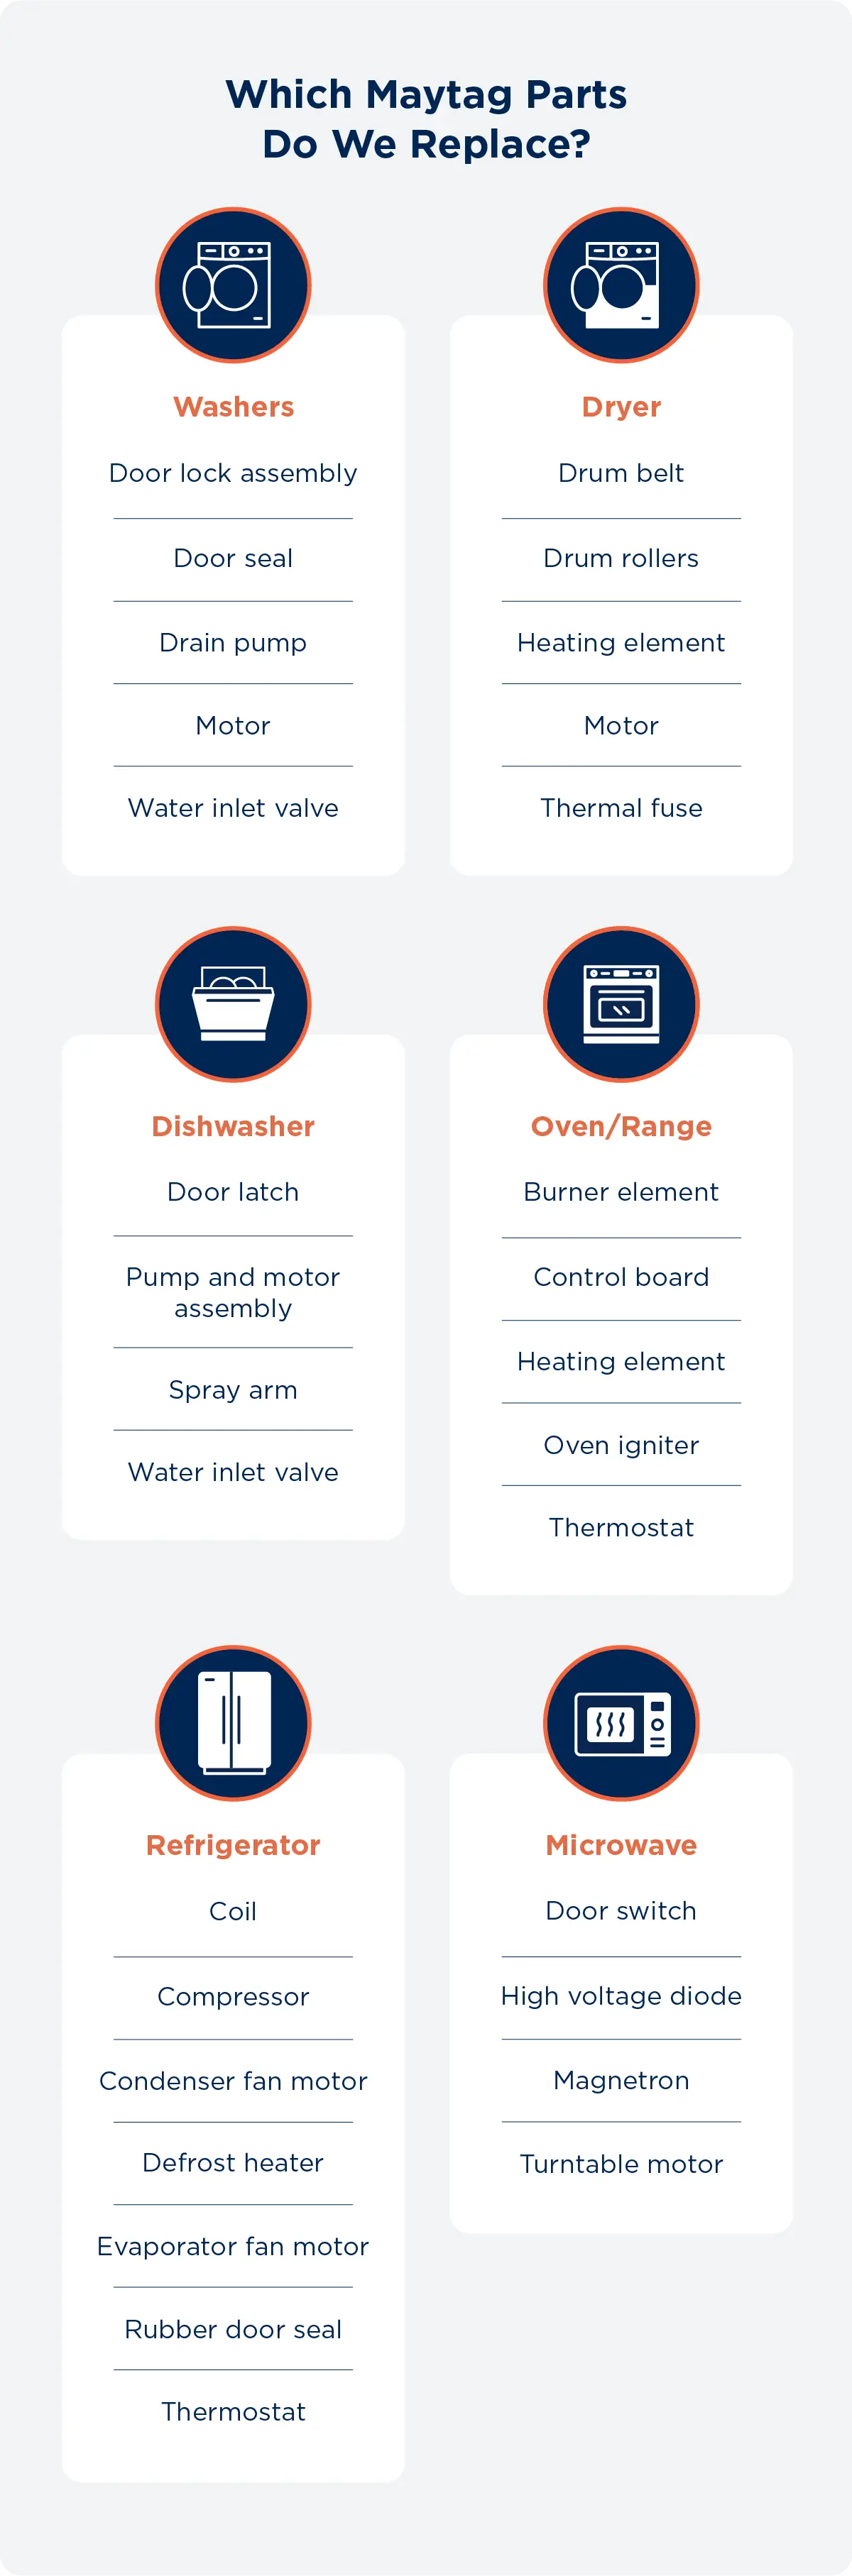 Infographic of which Maytag appliance parts Mr. Appliance replaces.